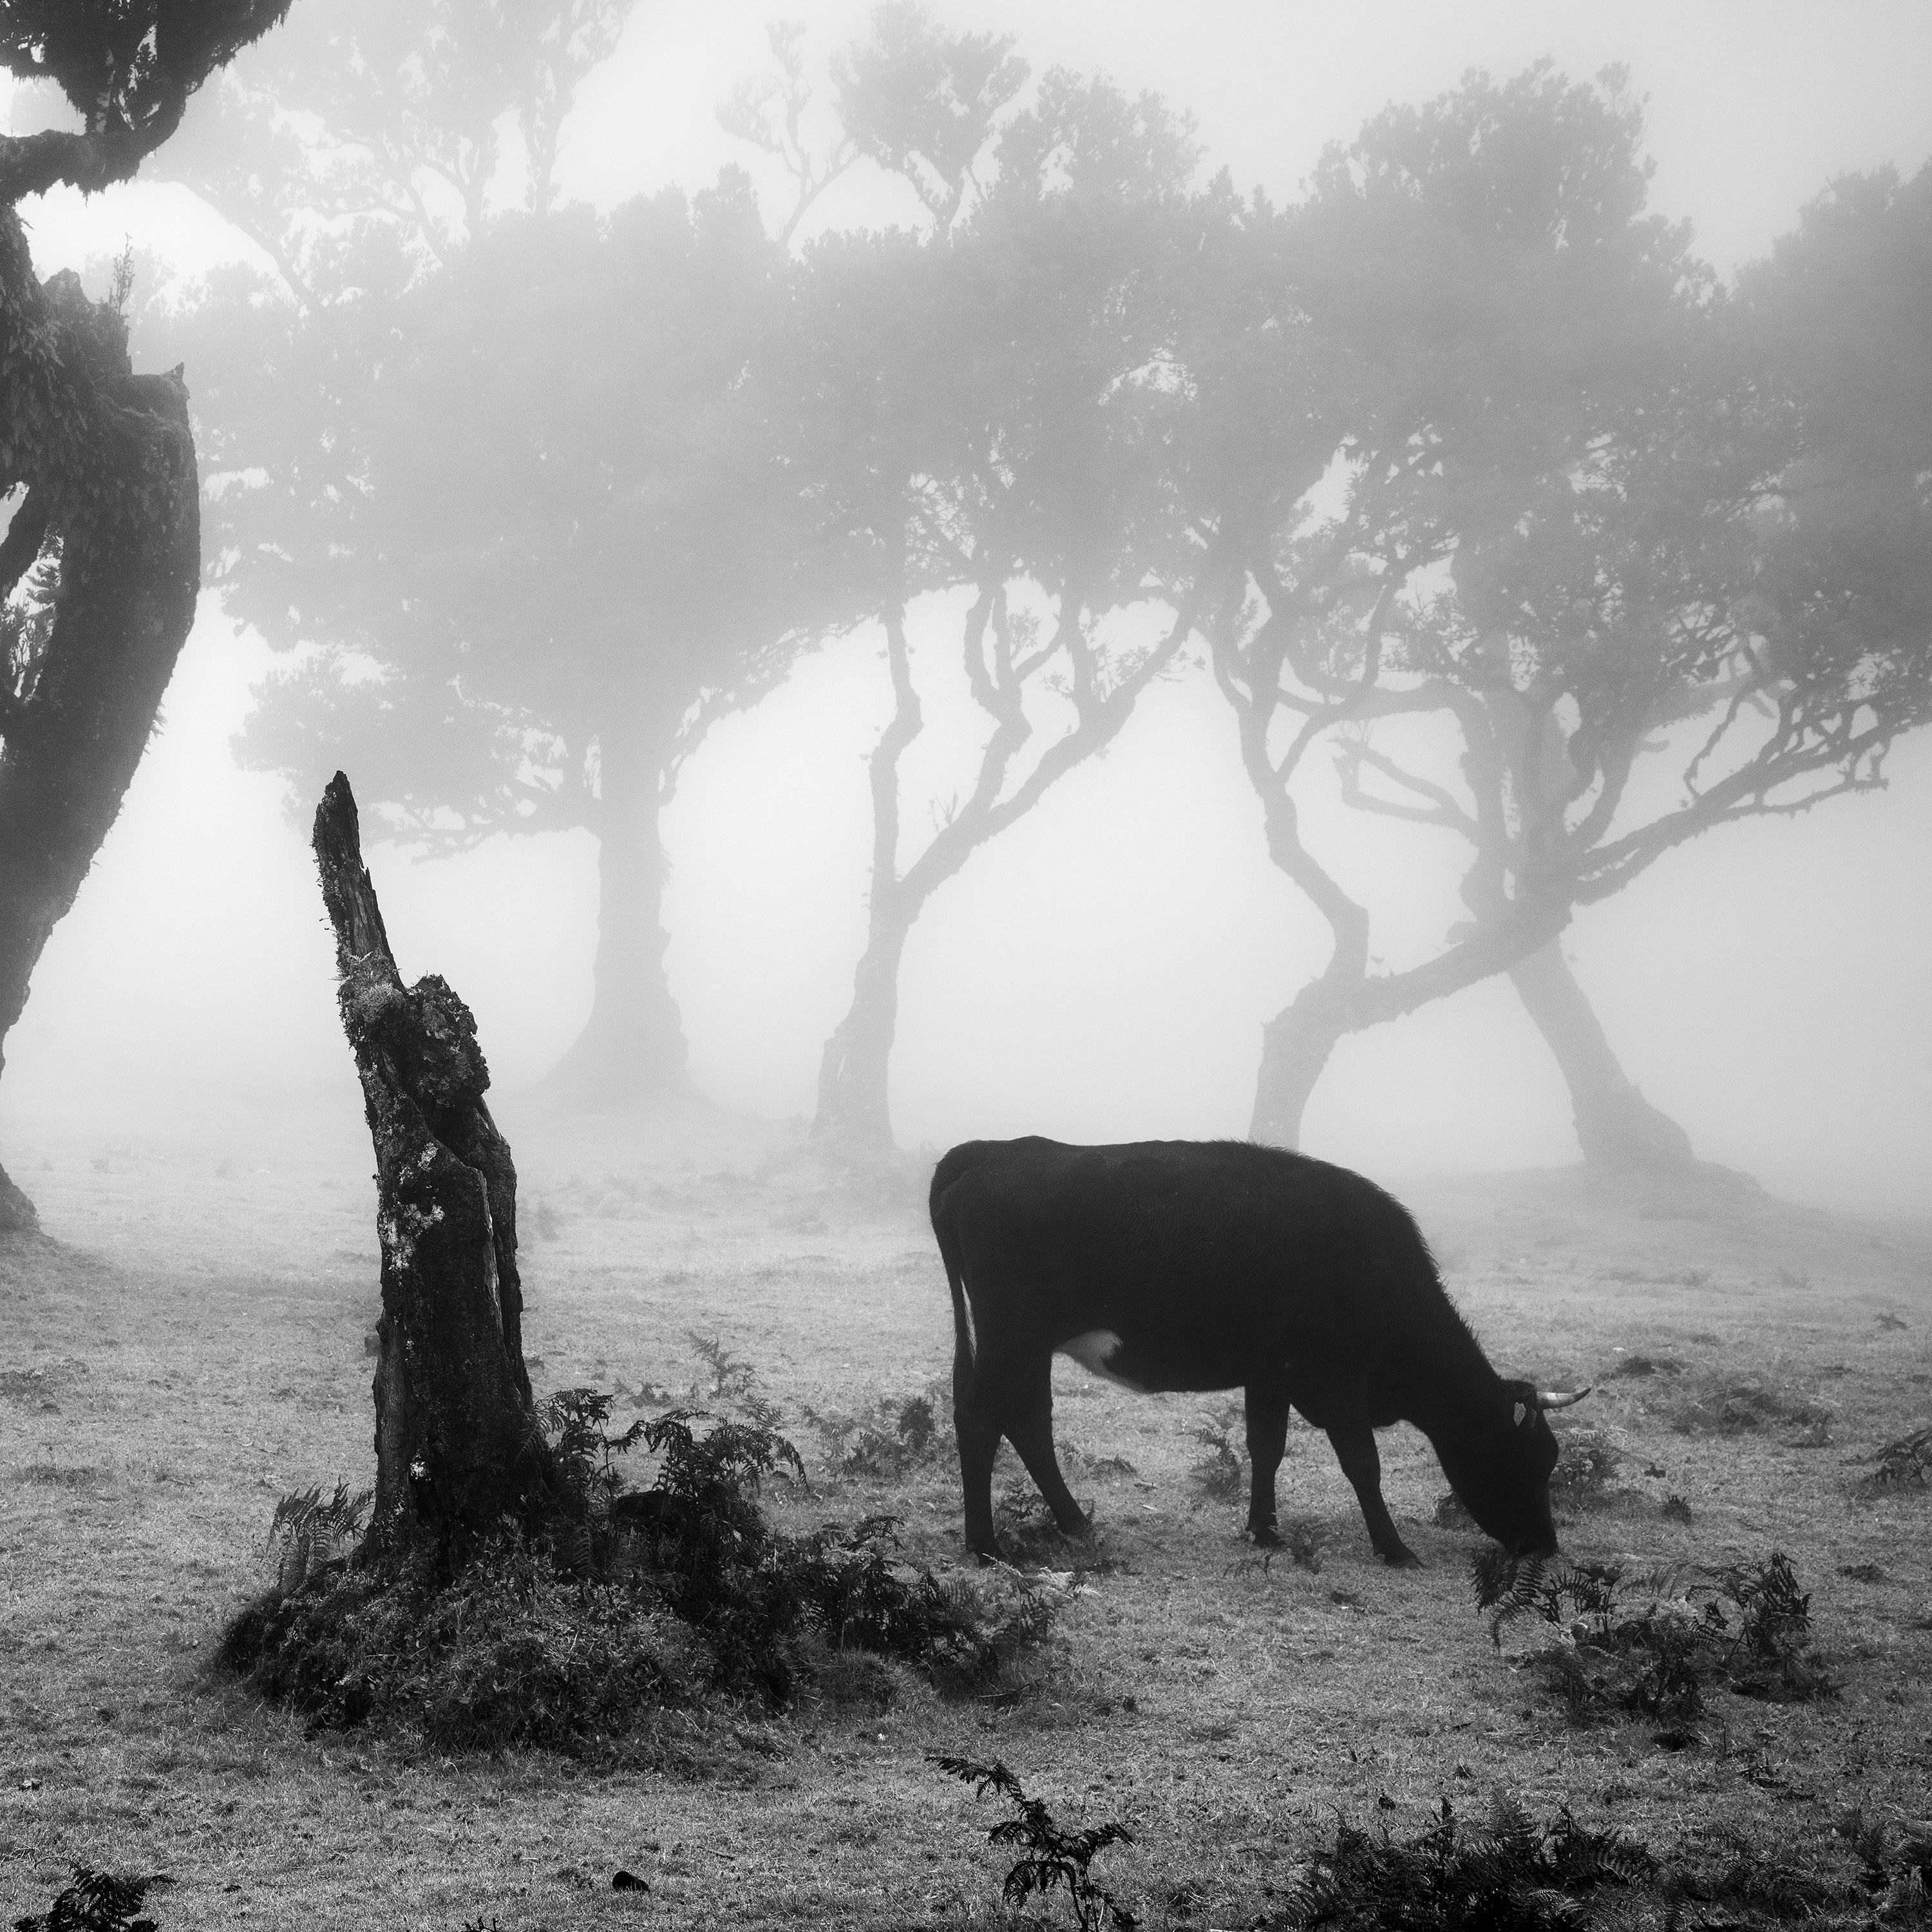 Cows on the foggy Pasture, misty forest, black and white photography, landscape For Sale 4